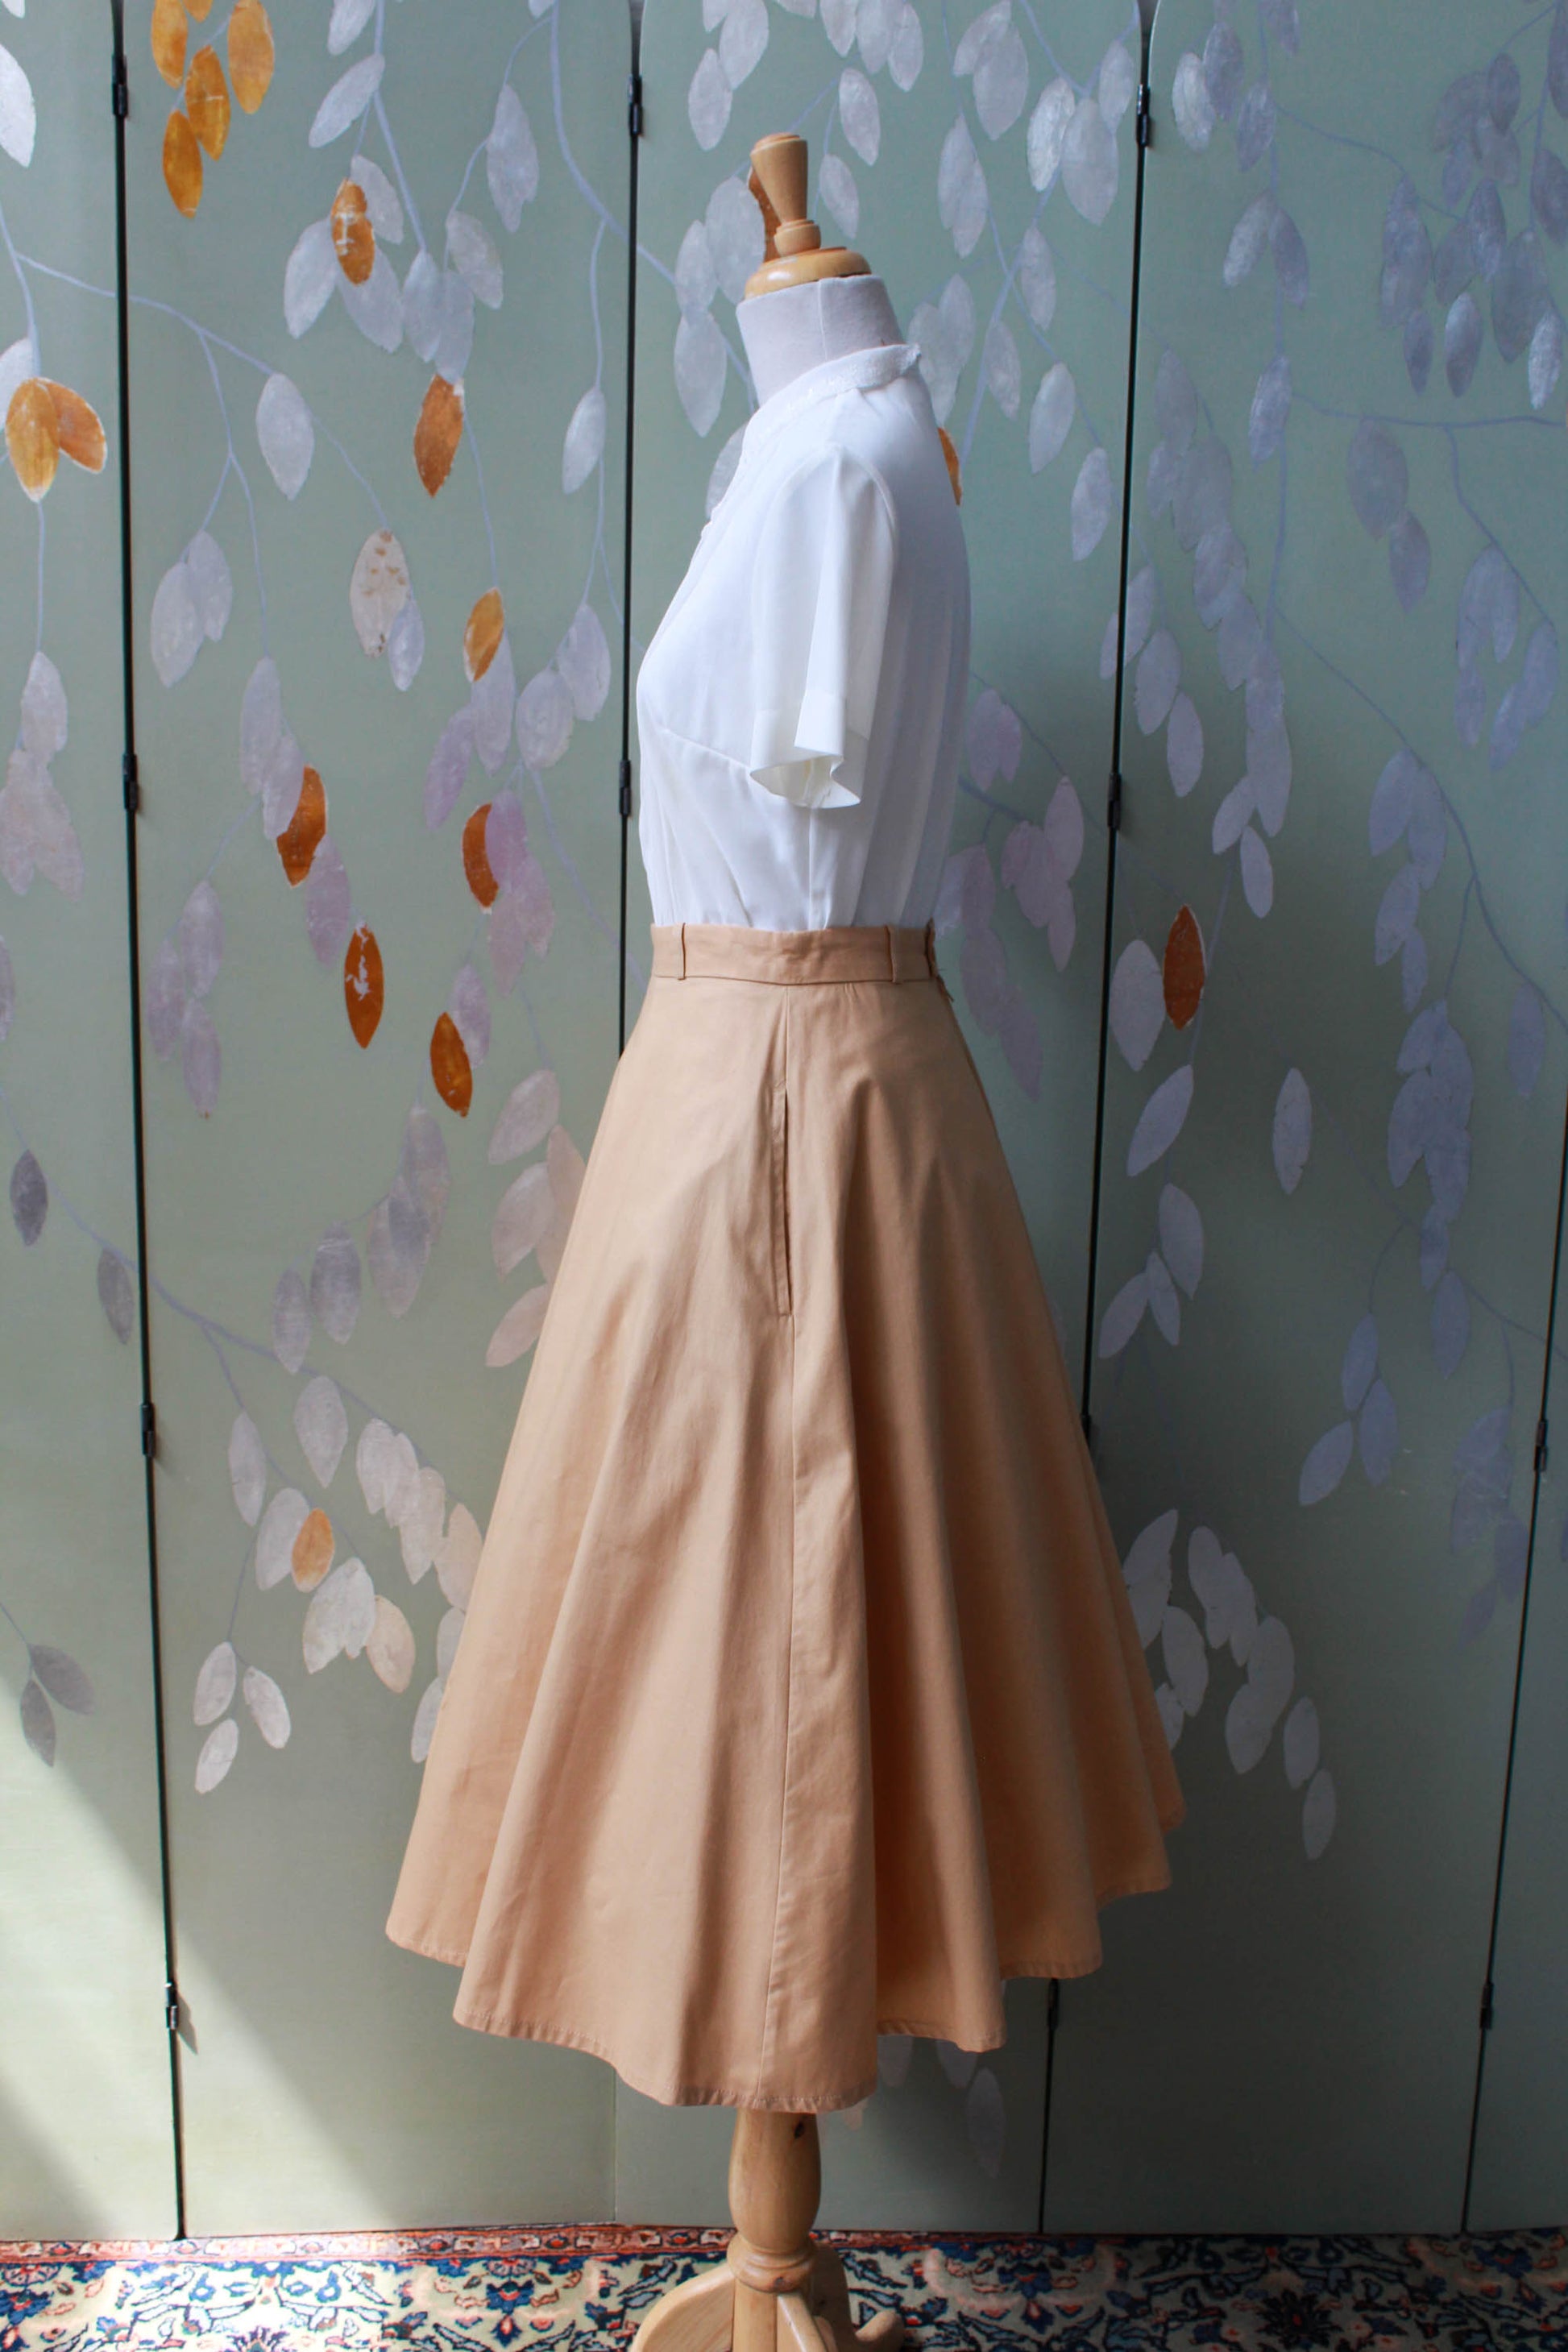 1970s 50s style circle skirt with parrot applique, high waisted, cotton resort skirt Made in France by Catherine I for Philippe Salvet St Tropez Nice vintage novelty skirt with pockets